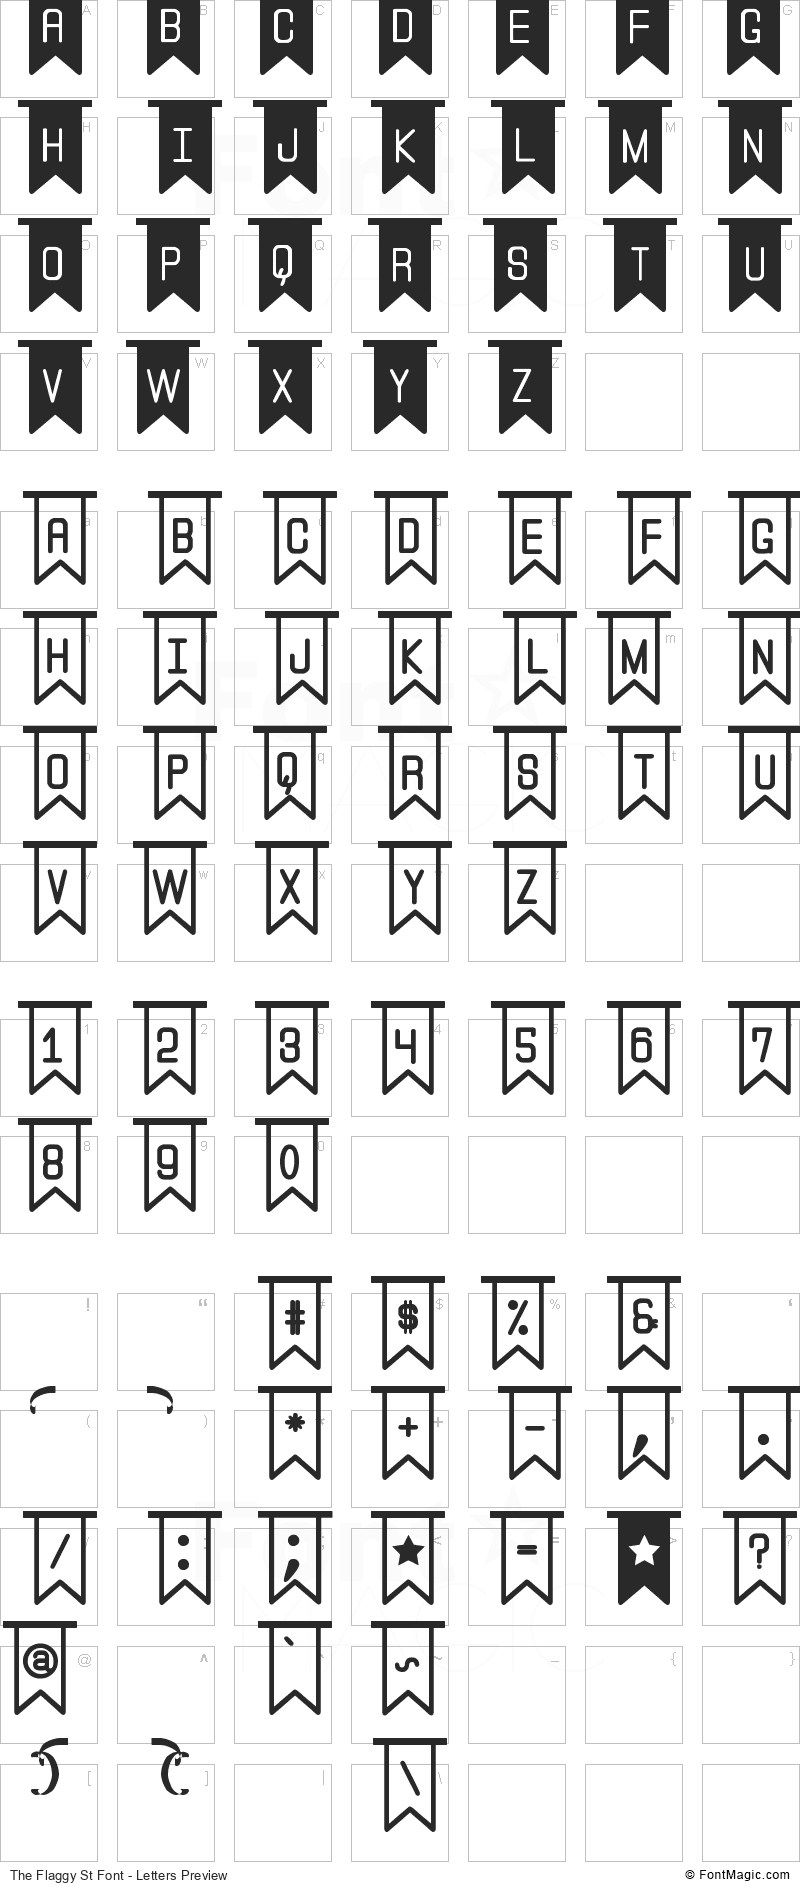 The Flaggy St Font - All Latters Preview Chart